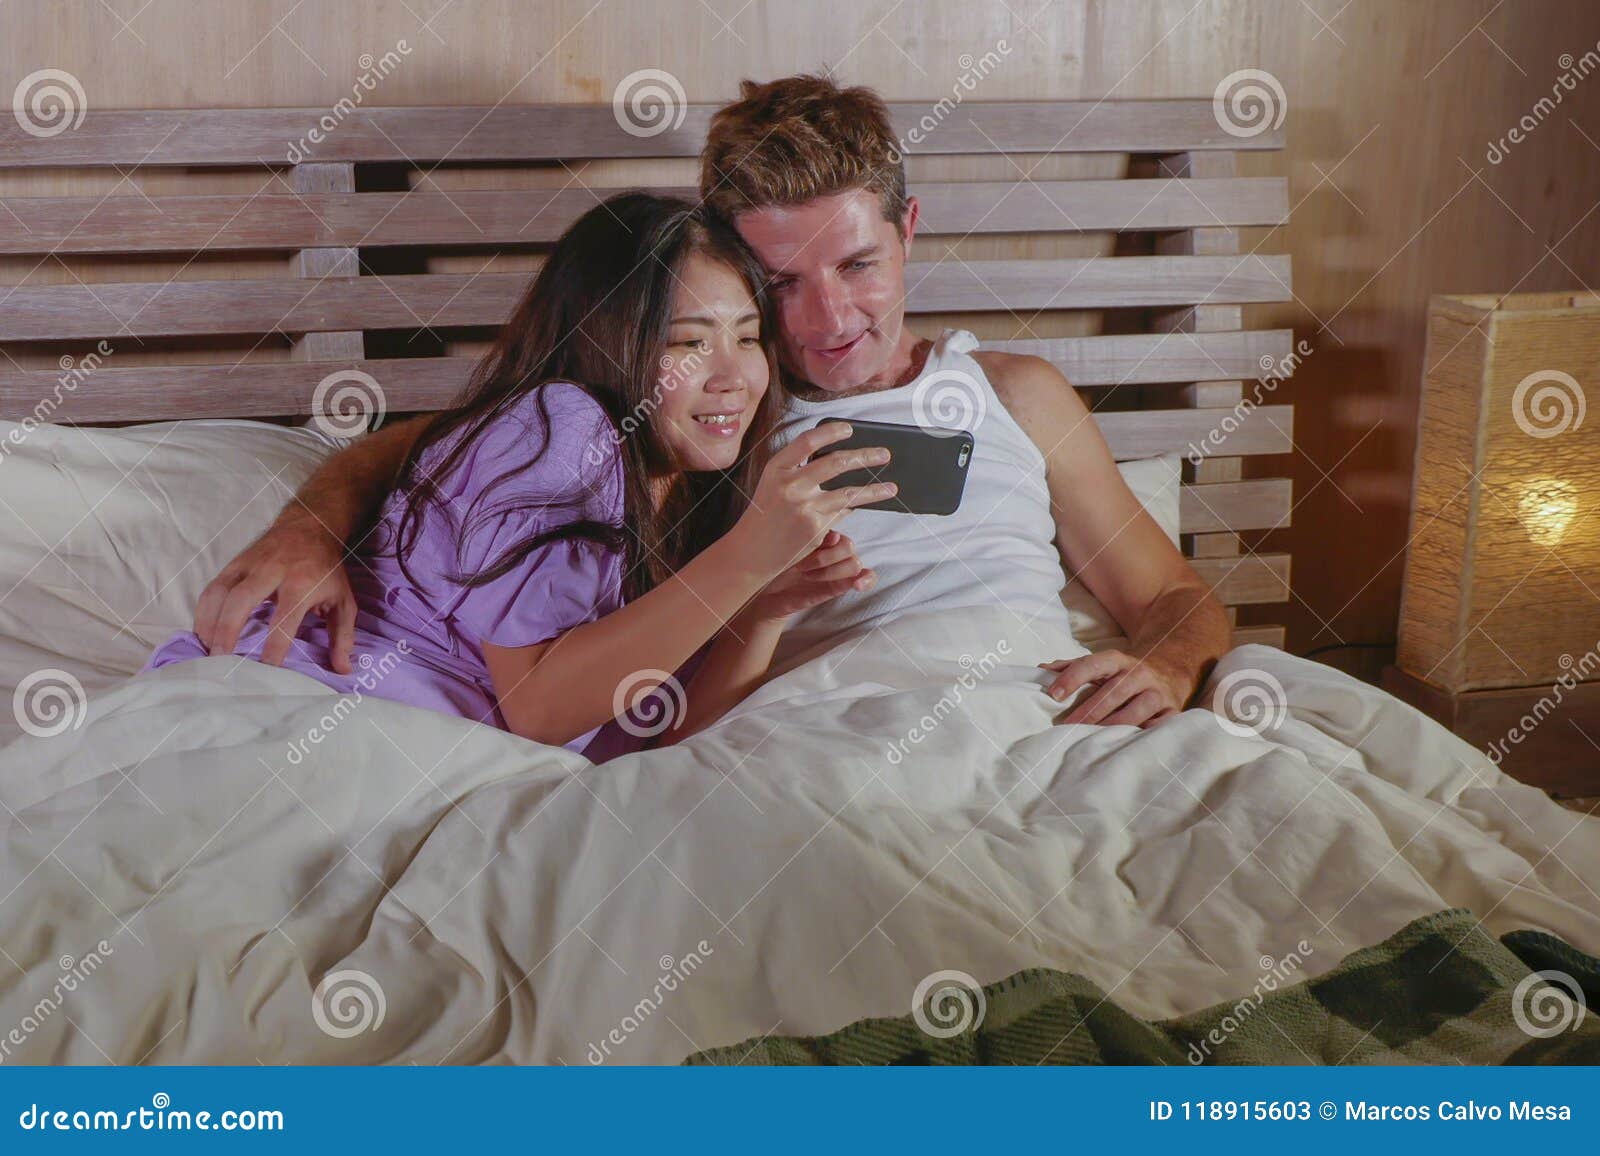 young-attractive-beautiful-mix-ethnicity-happy-couple-asian-korean-woman-caucasian-man-lying-bed-cuddling-sweet-us-118915603.jpg